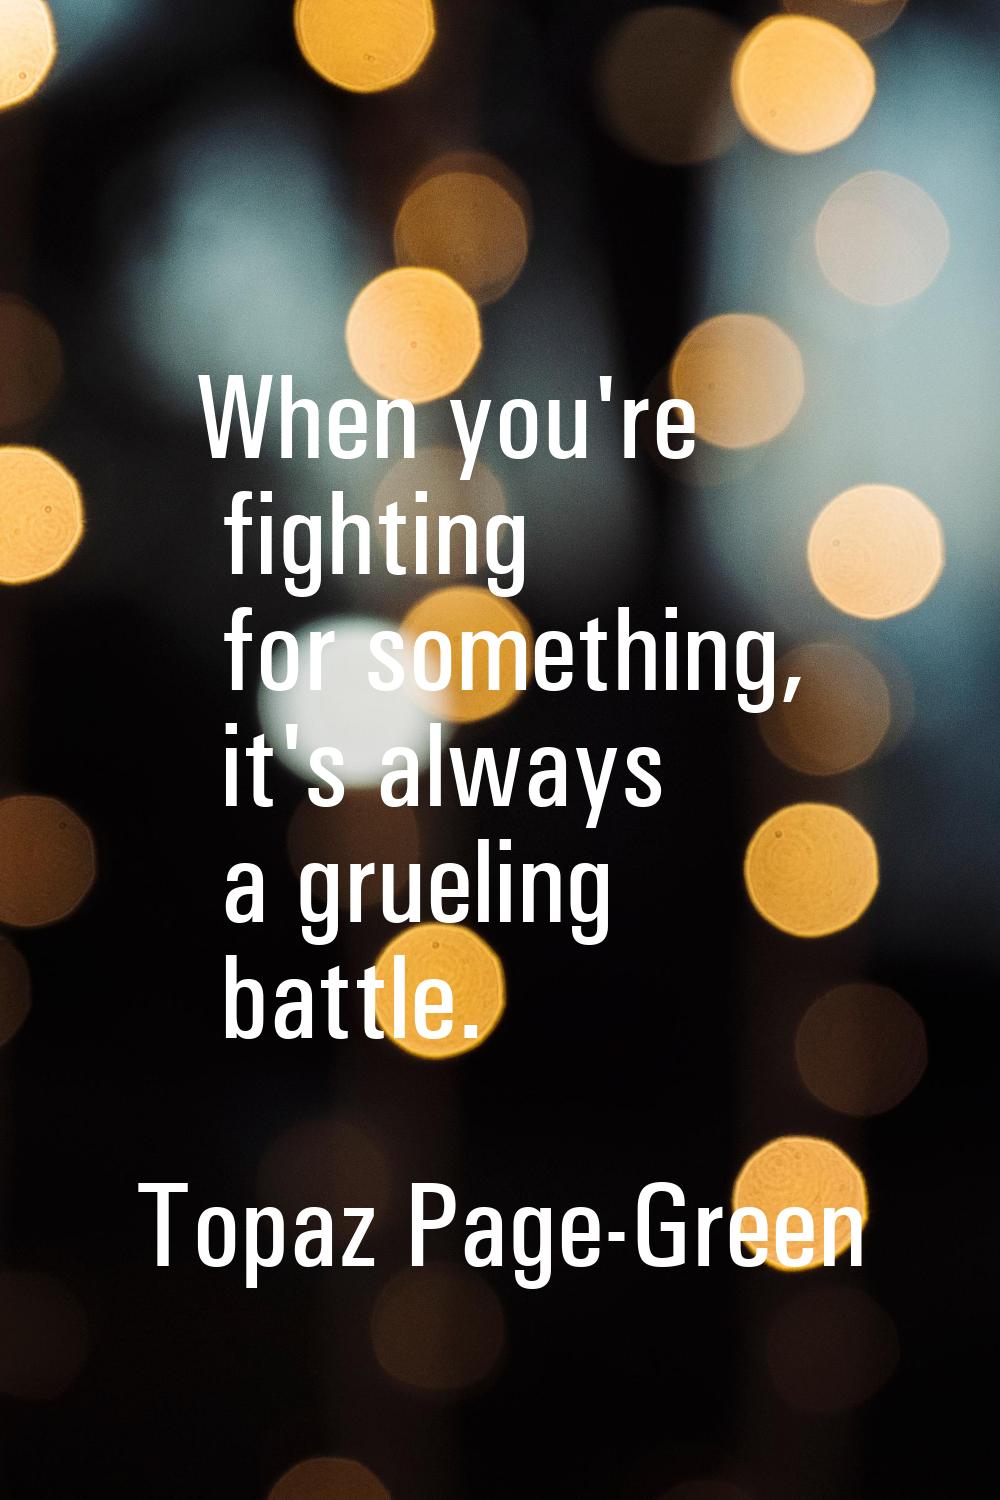 When you're fighting for something, it's always a grueling battle.